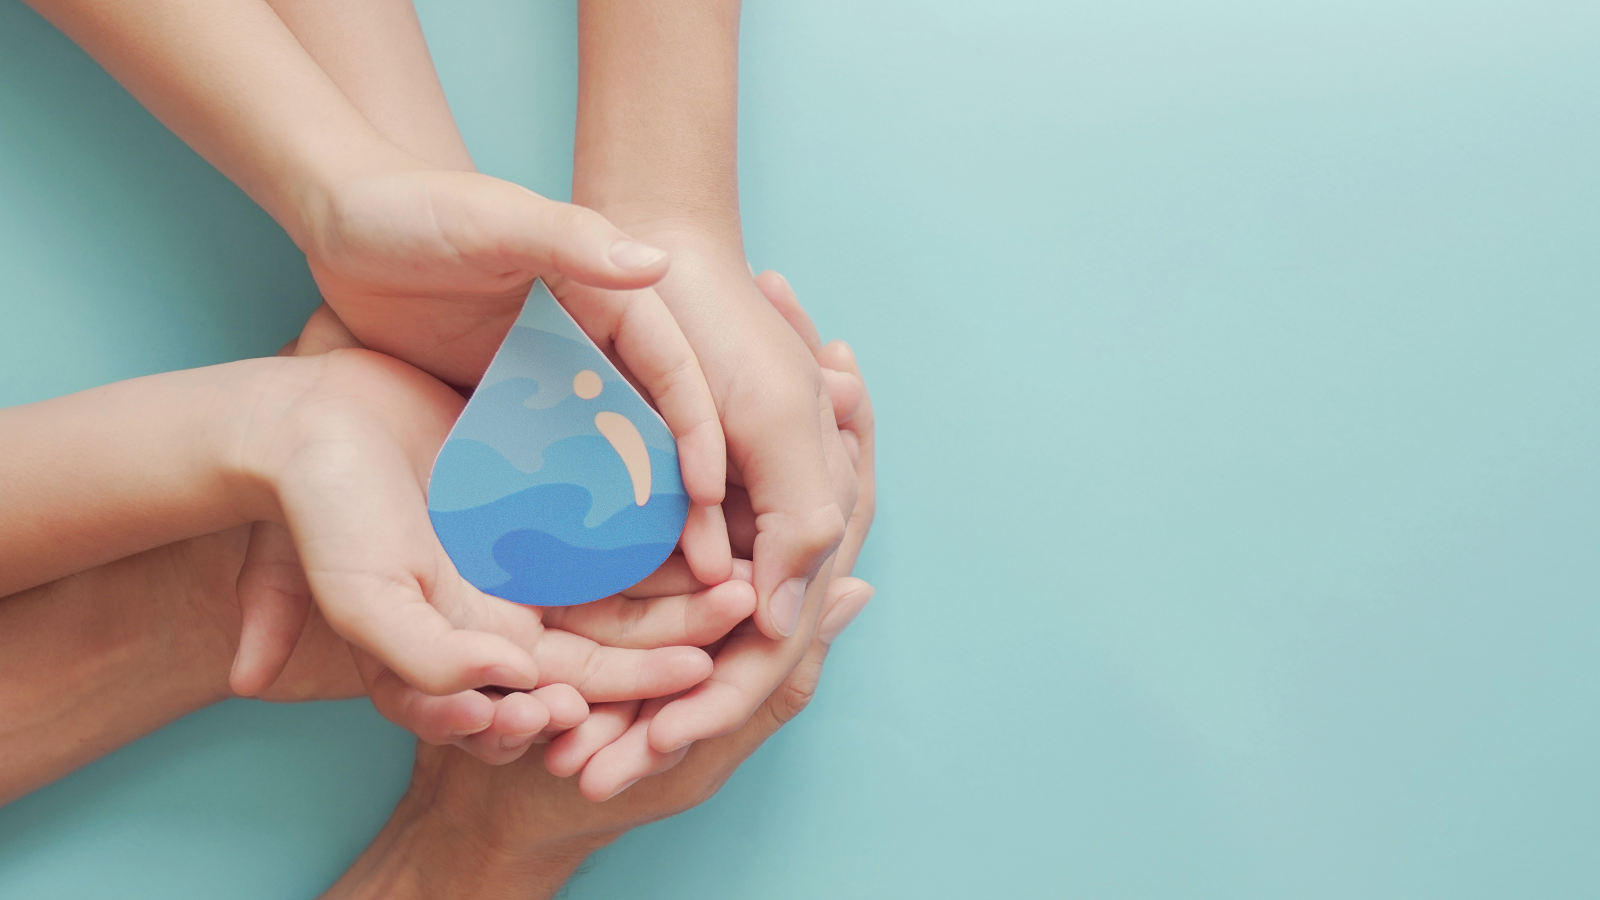 Water saving campaign, image showing hands holding a water droplet on green background.